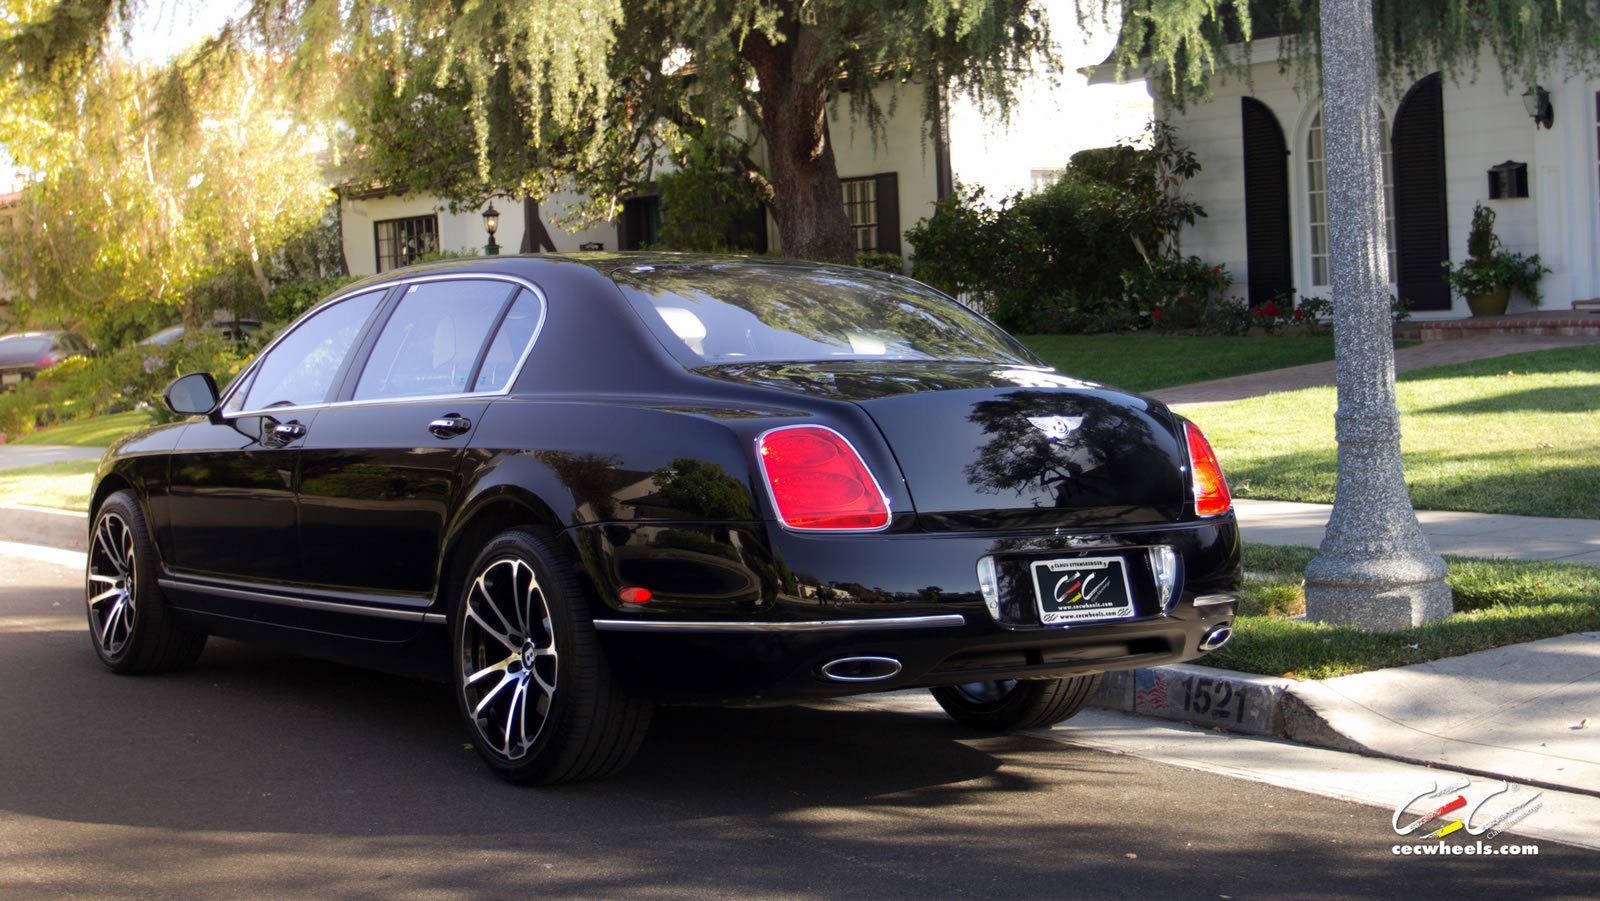 2015, Cars, Cec, Tuning, Wheels, Bentley, Continental, Flying, Spur Wallpaper